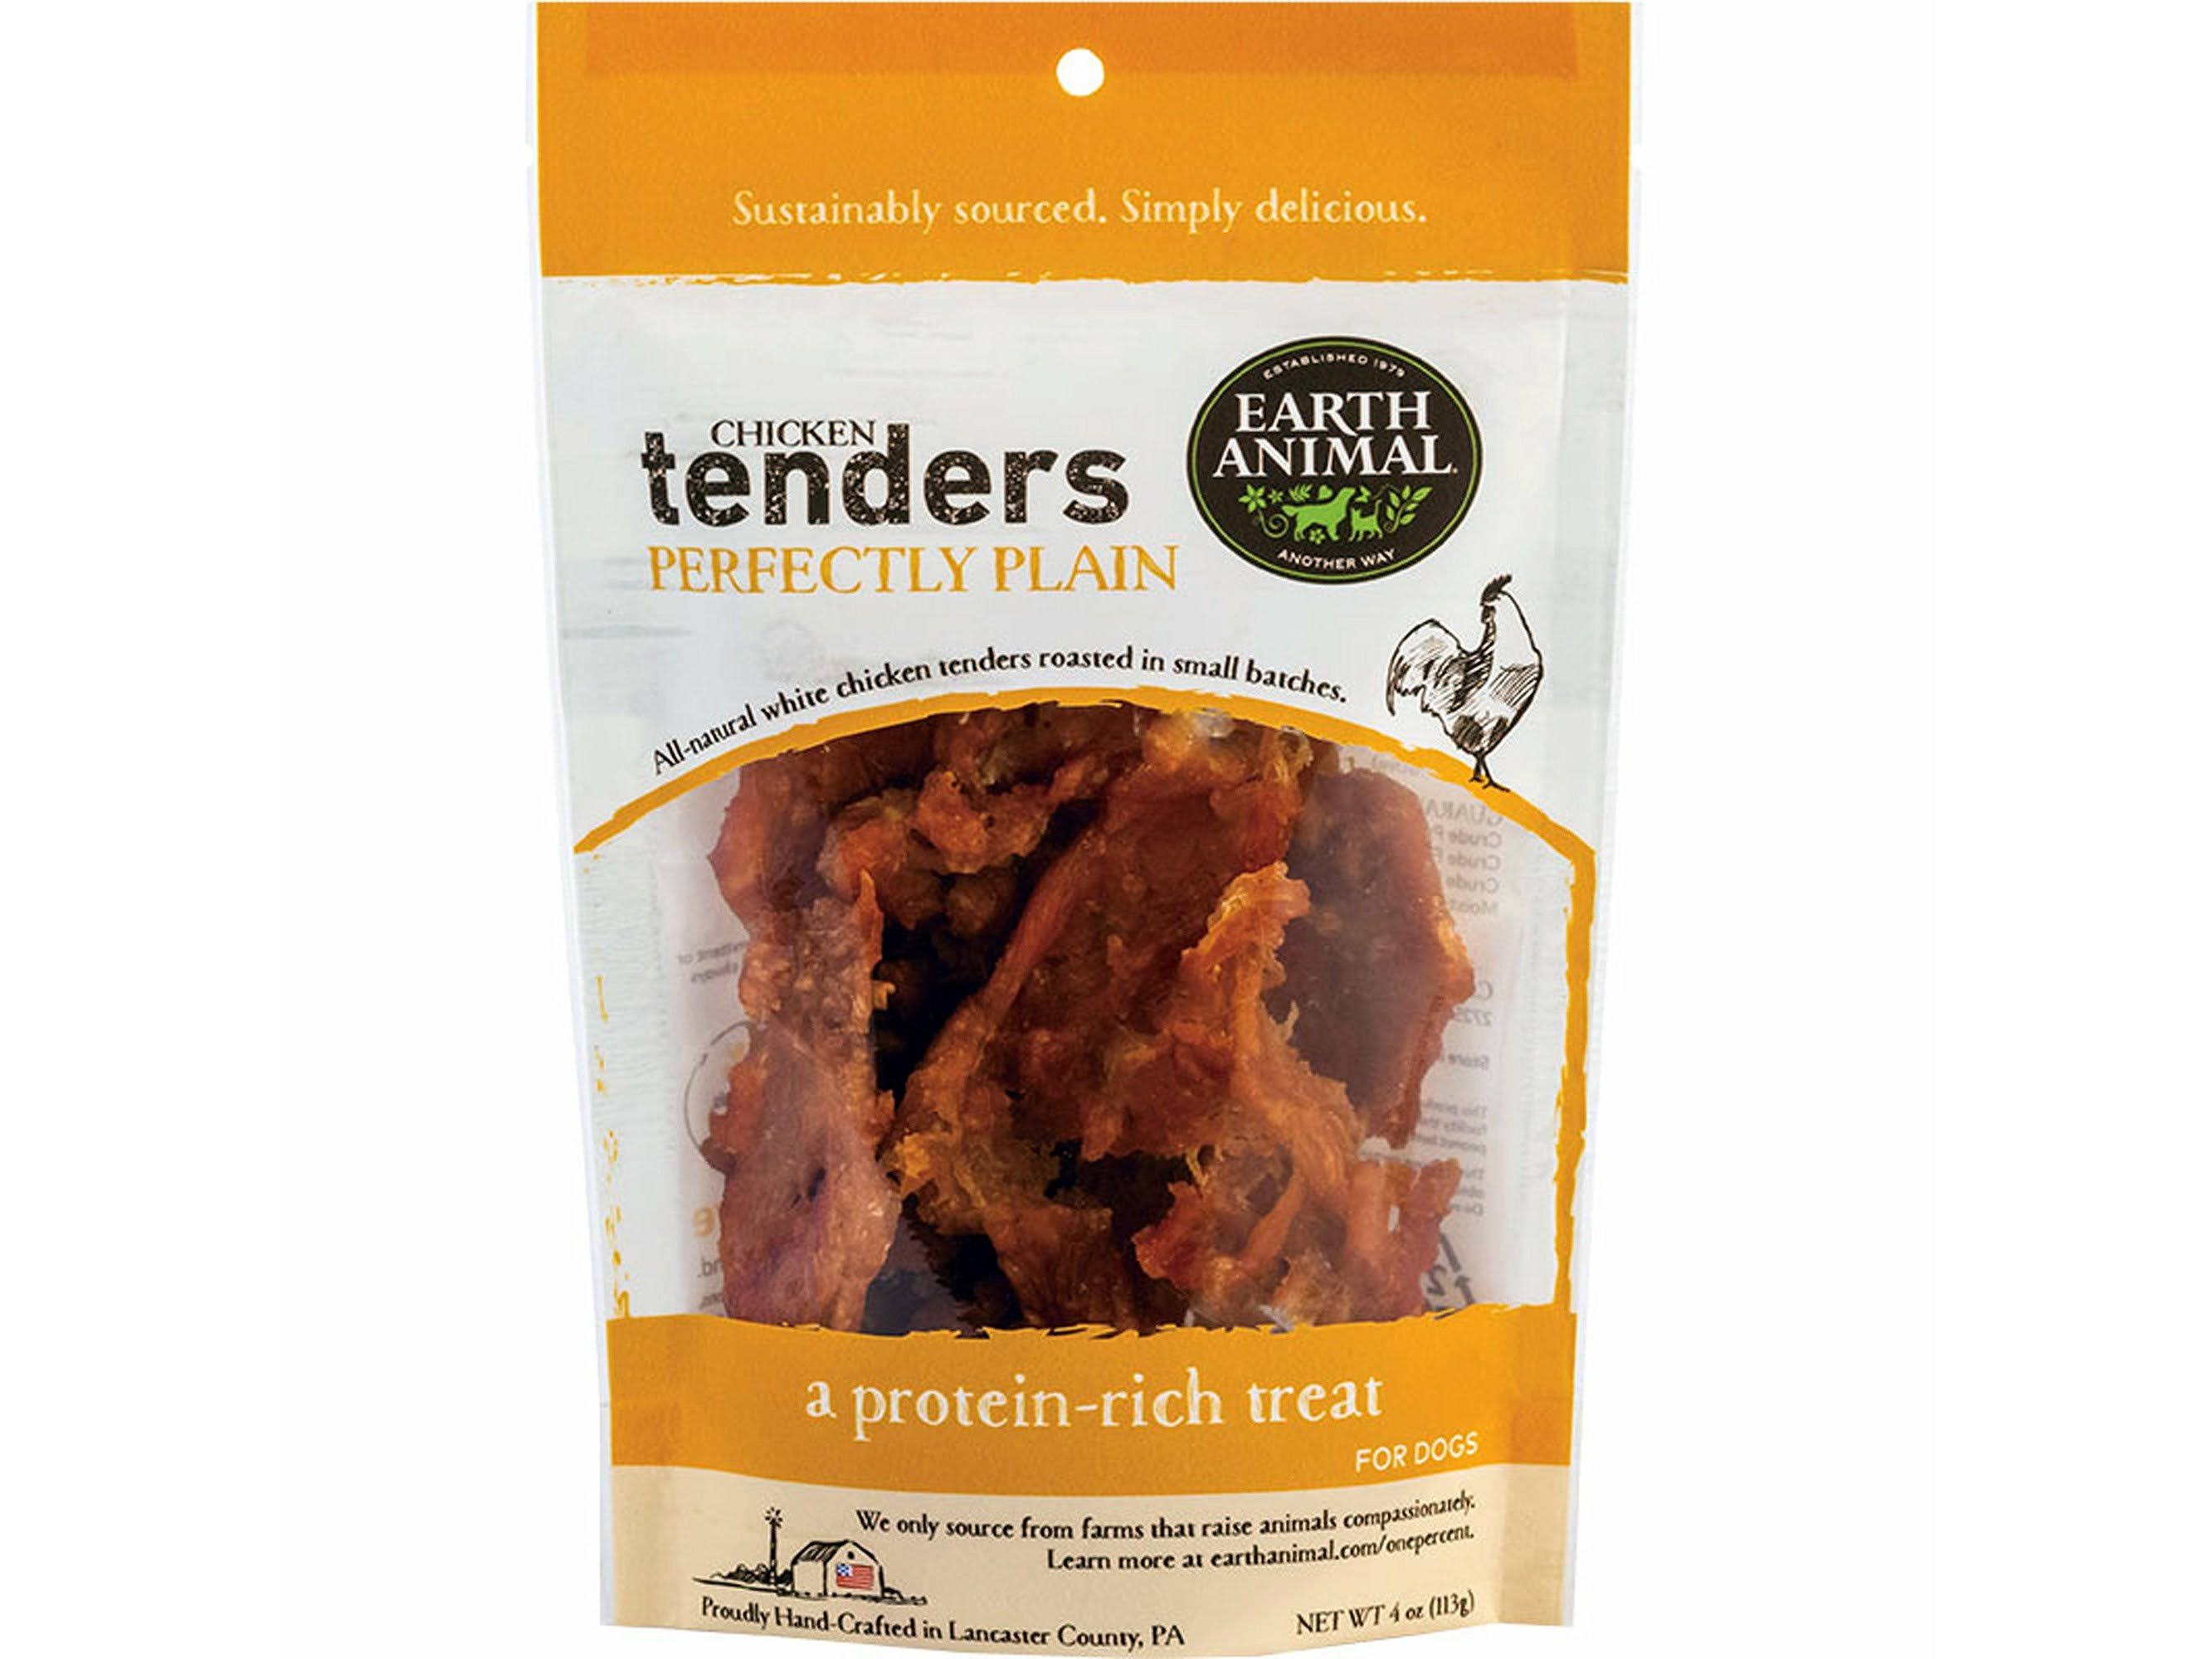 Earth Animal Chicken Tenders Perfectly Plain 4 oz.